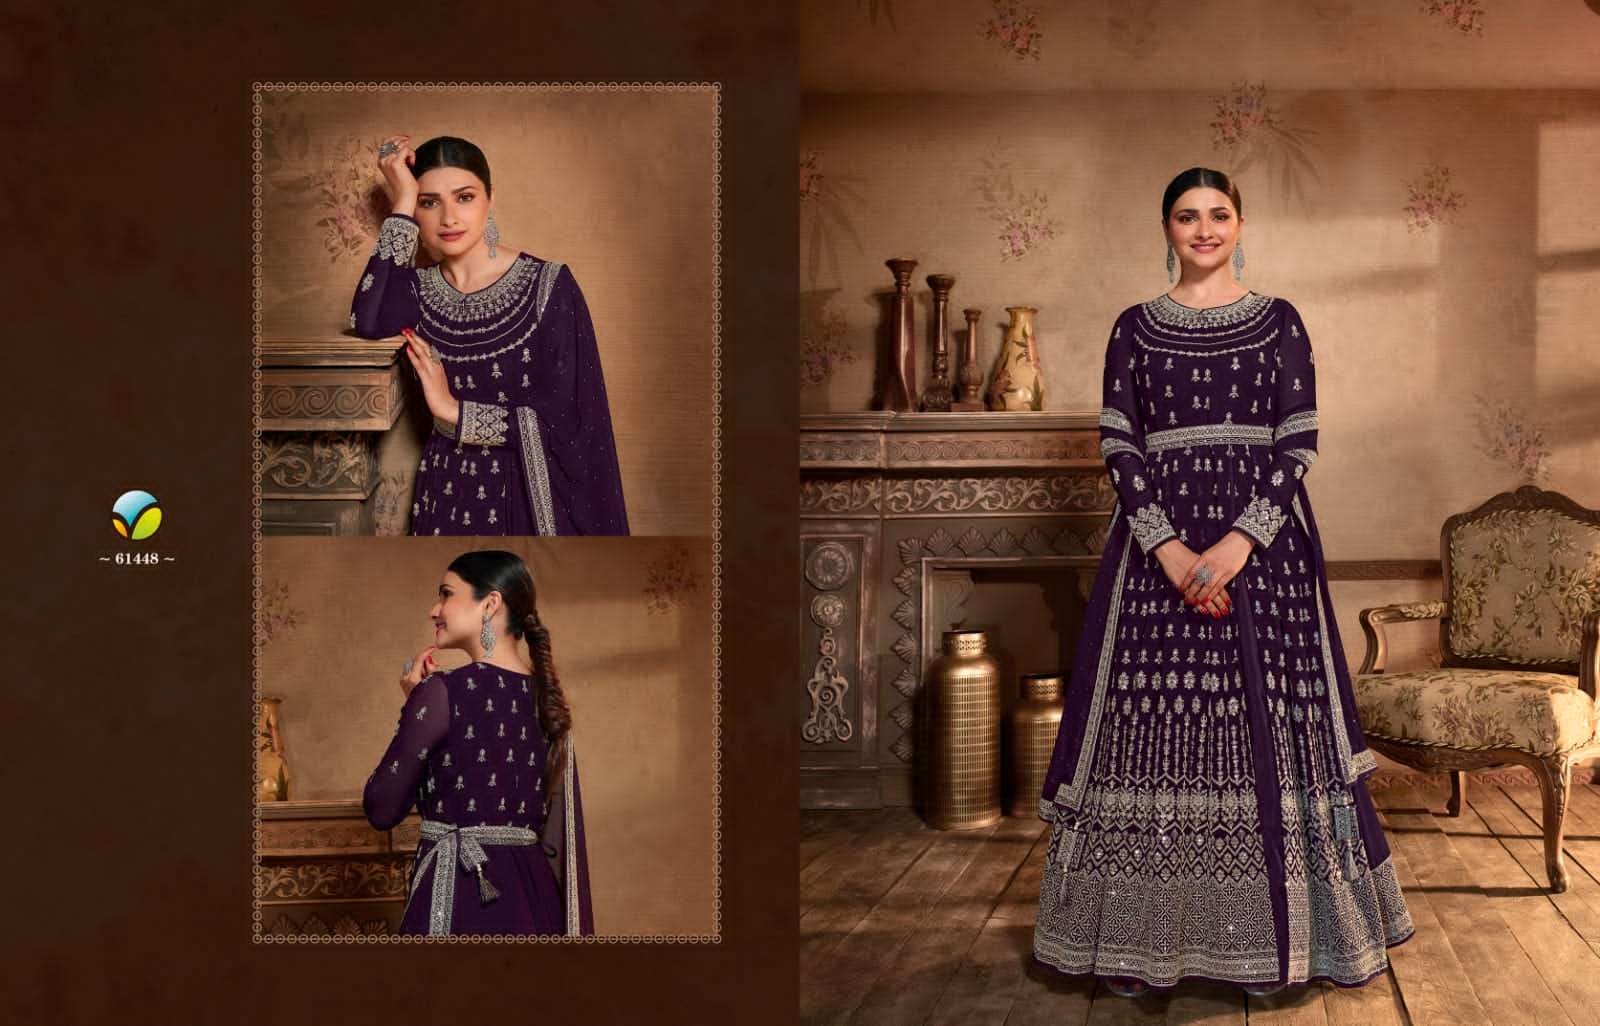 vinay fashion pakeeza 61441-61448 series fancy party wear salwar suits collection surat